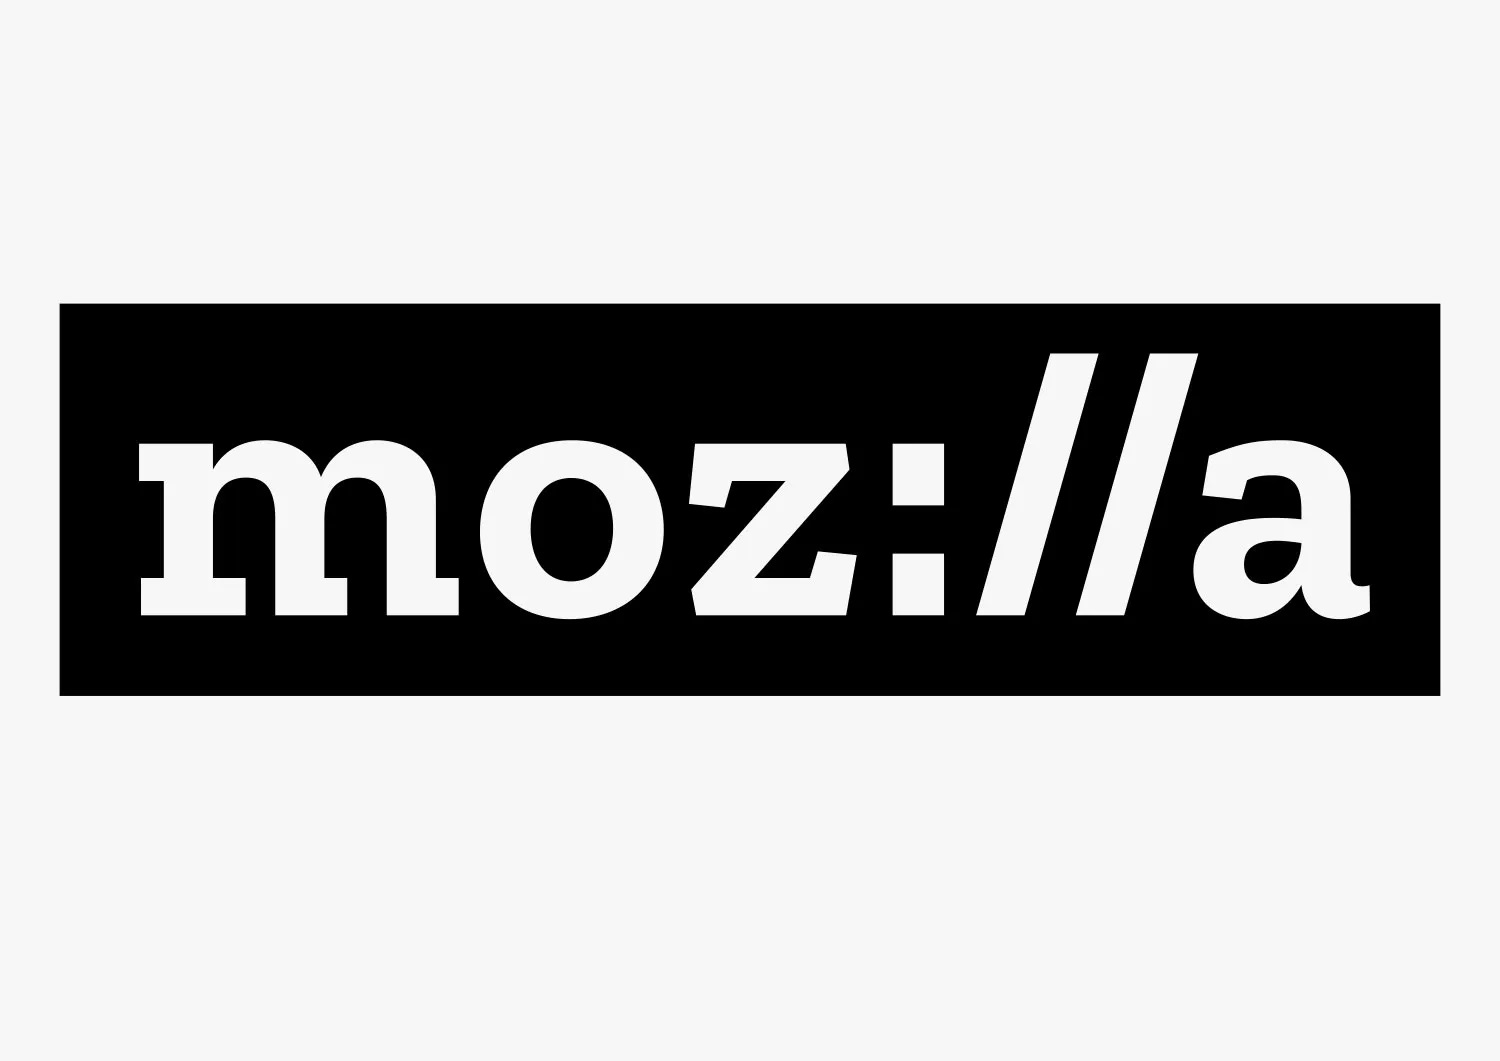 Why Mozilla Is Focusing On A Decentralized Social Networking Future